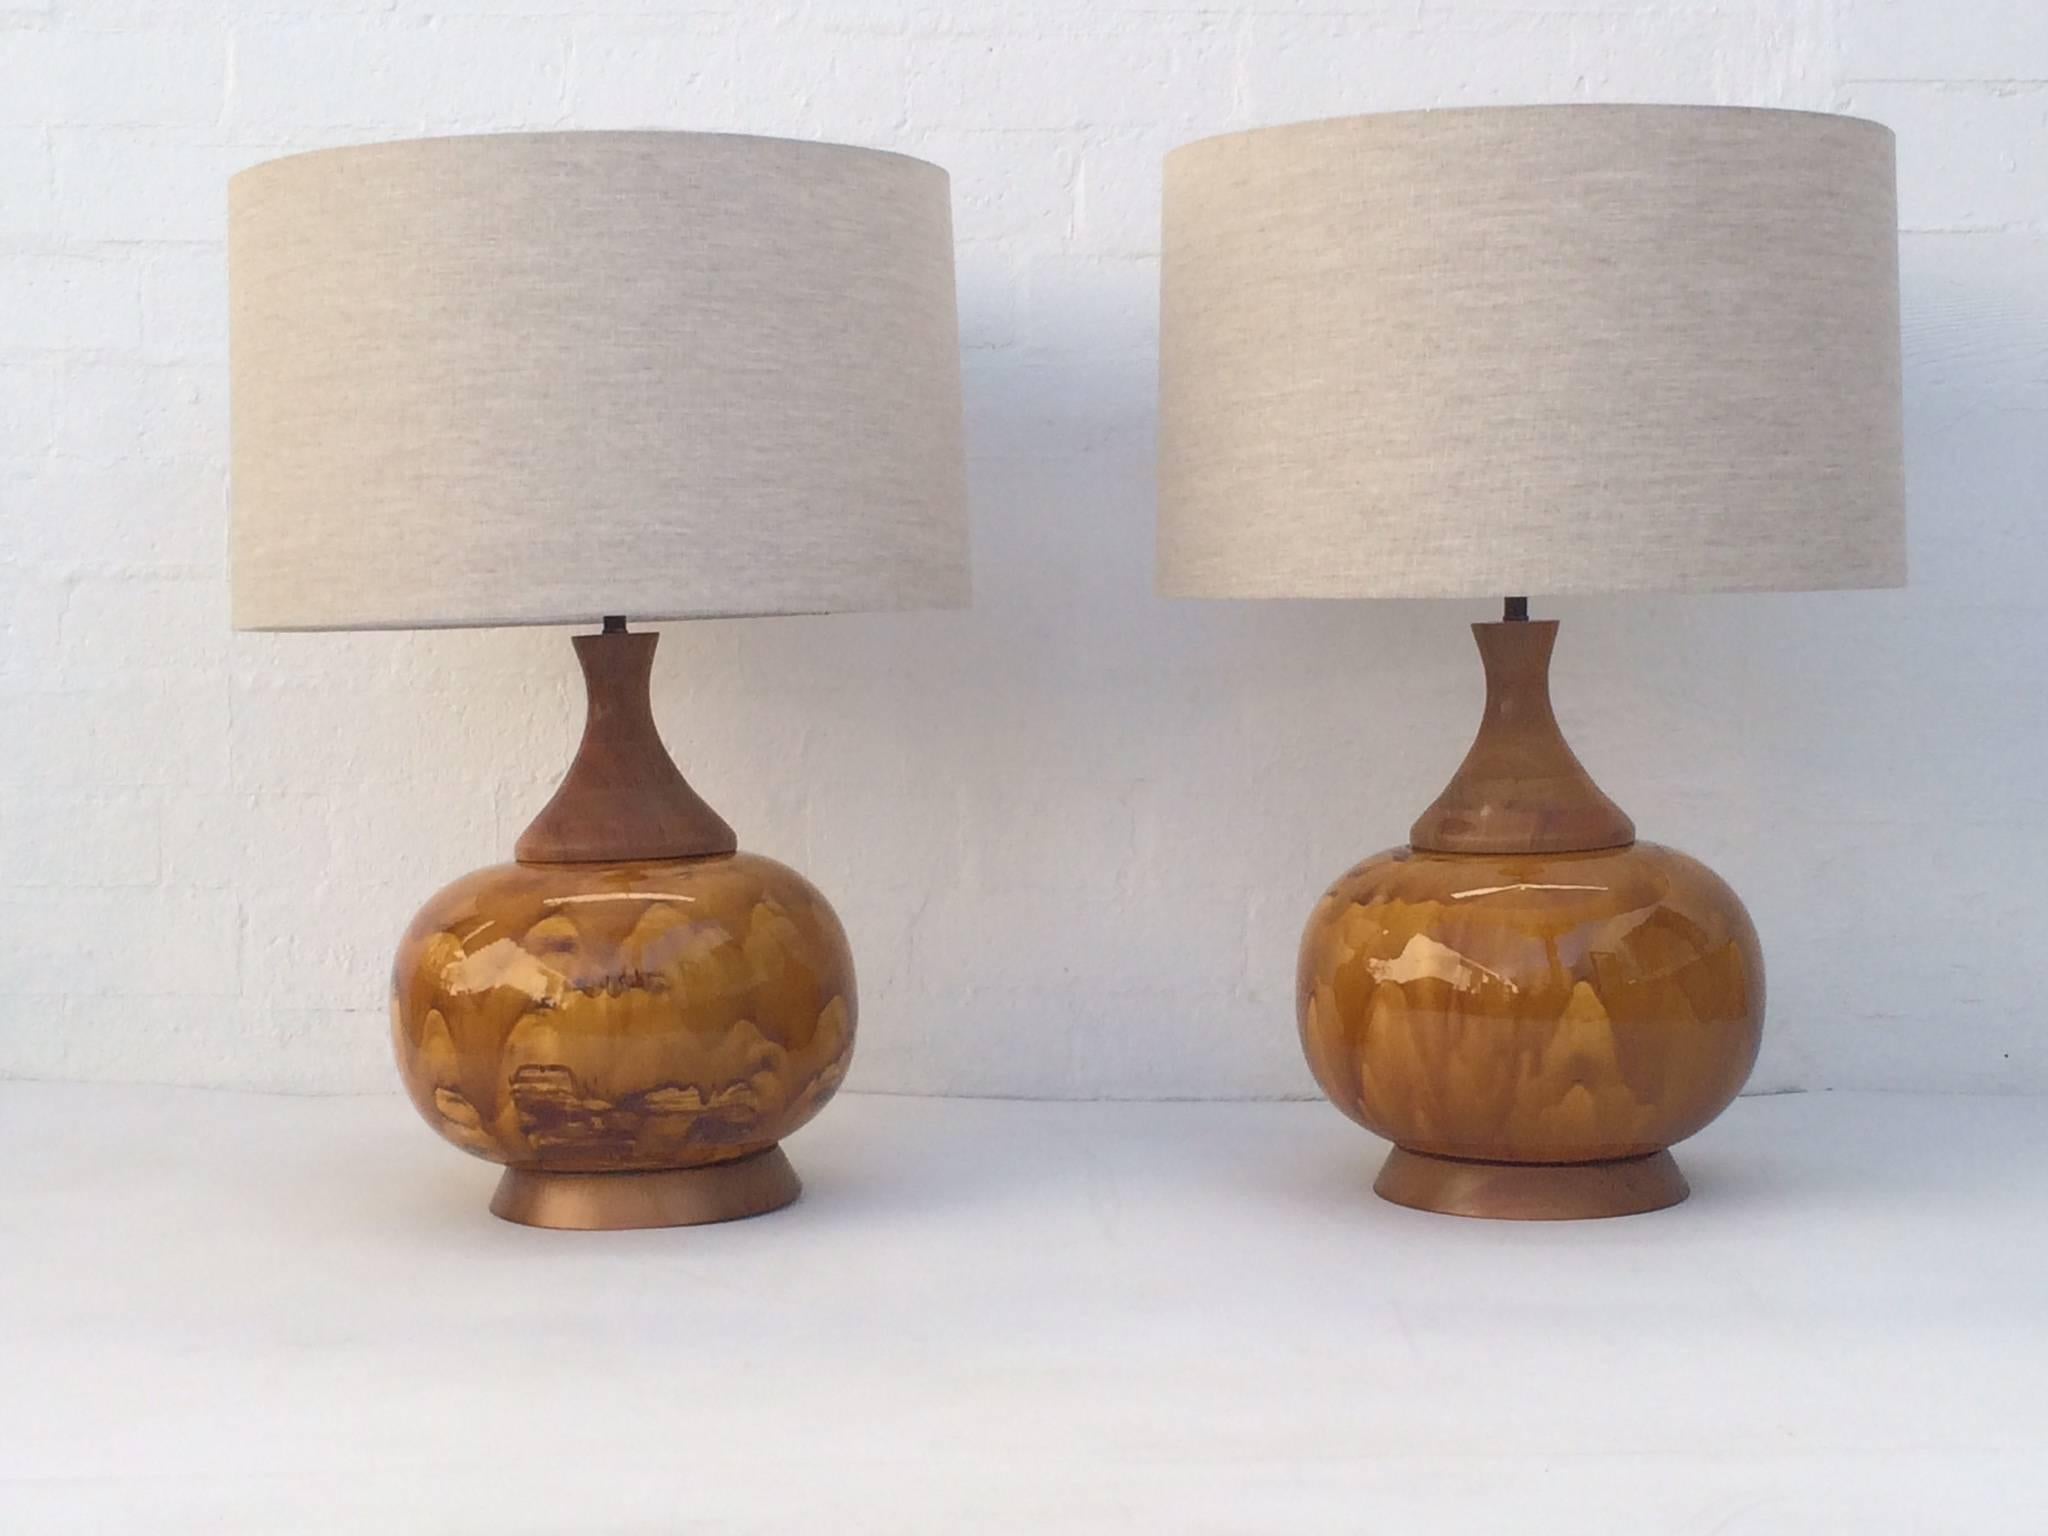 Pair of large-scale drip glazed ceramic lamps with walnut bases. 
These lamps are absolutely stunning!
Newly re-wired with new brass hardware.
New off-white linen shades, 
circa 1960s.